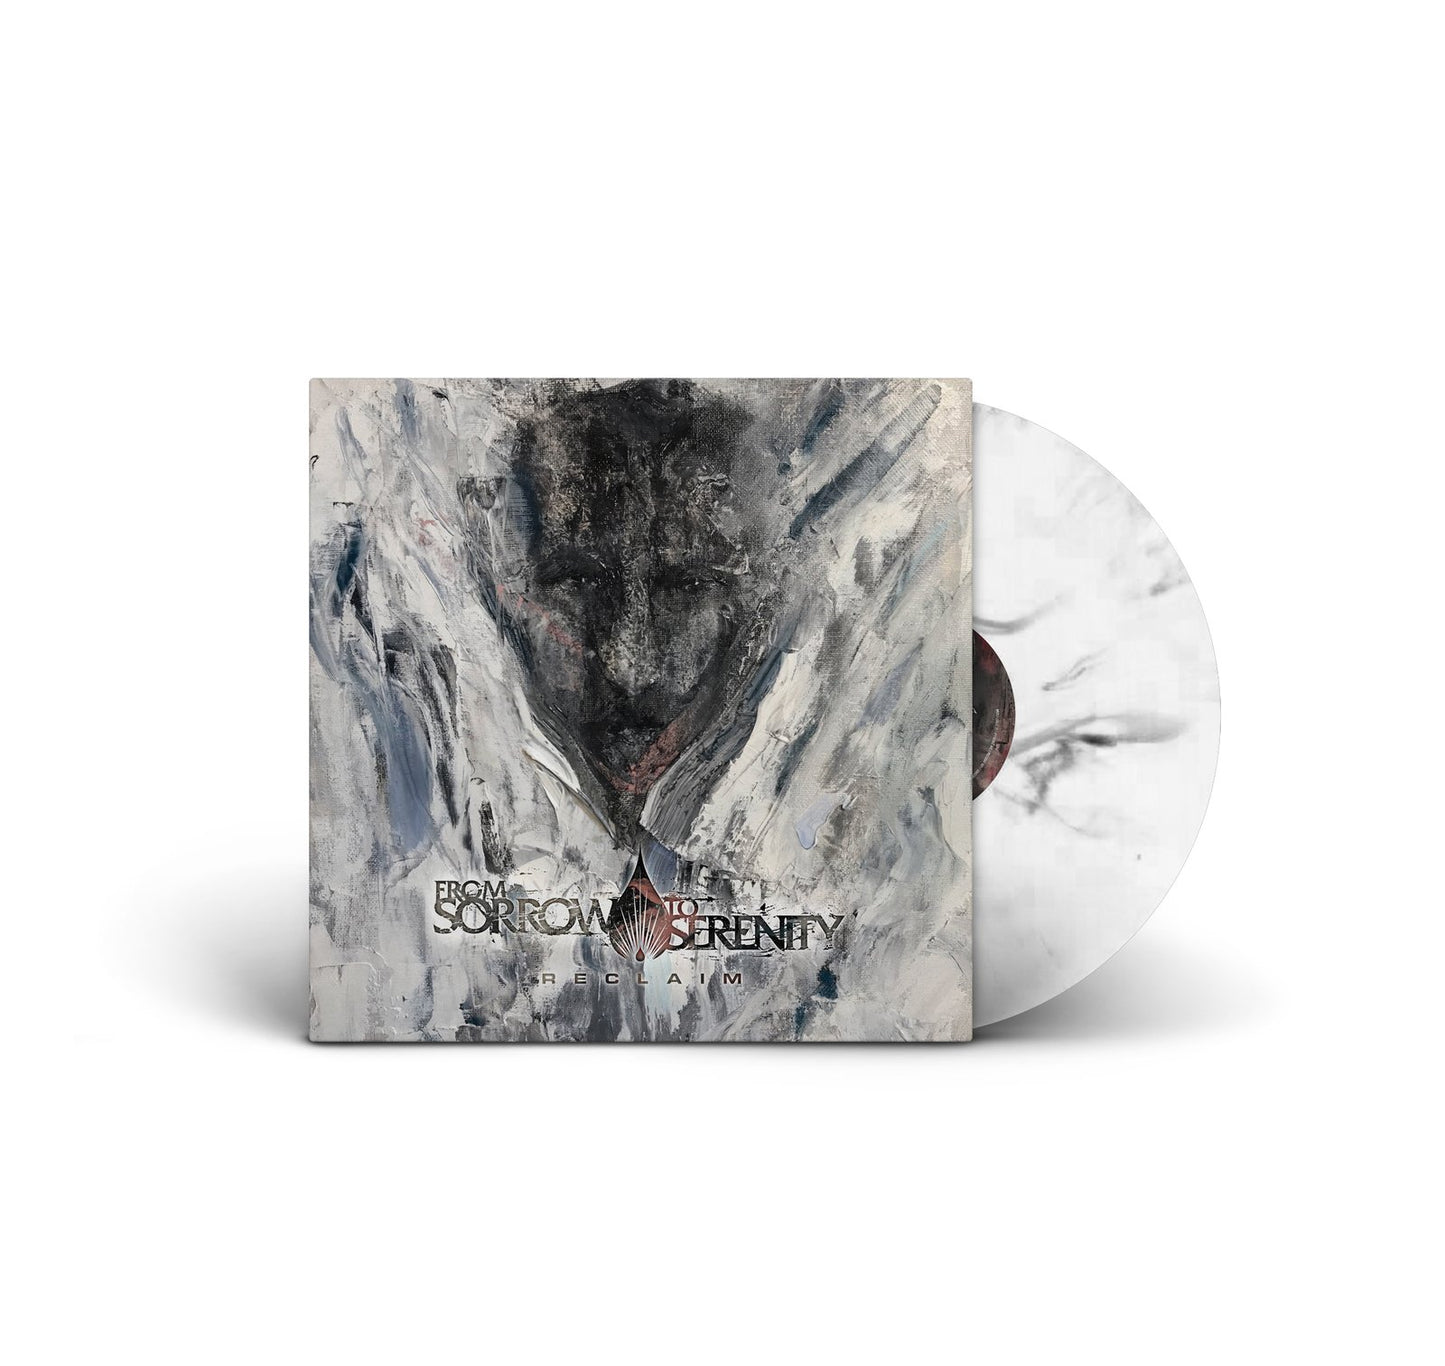 From Sorrow To Serenity "Reclaim" LP